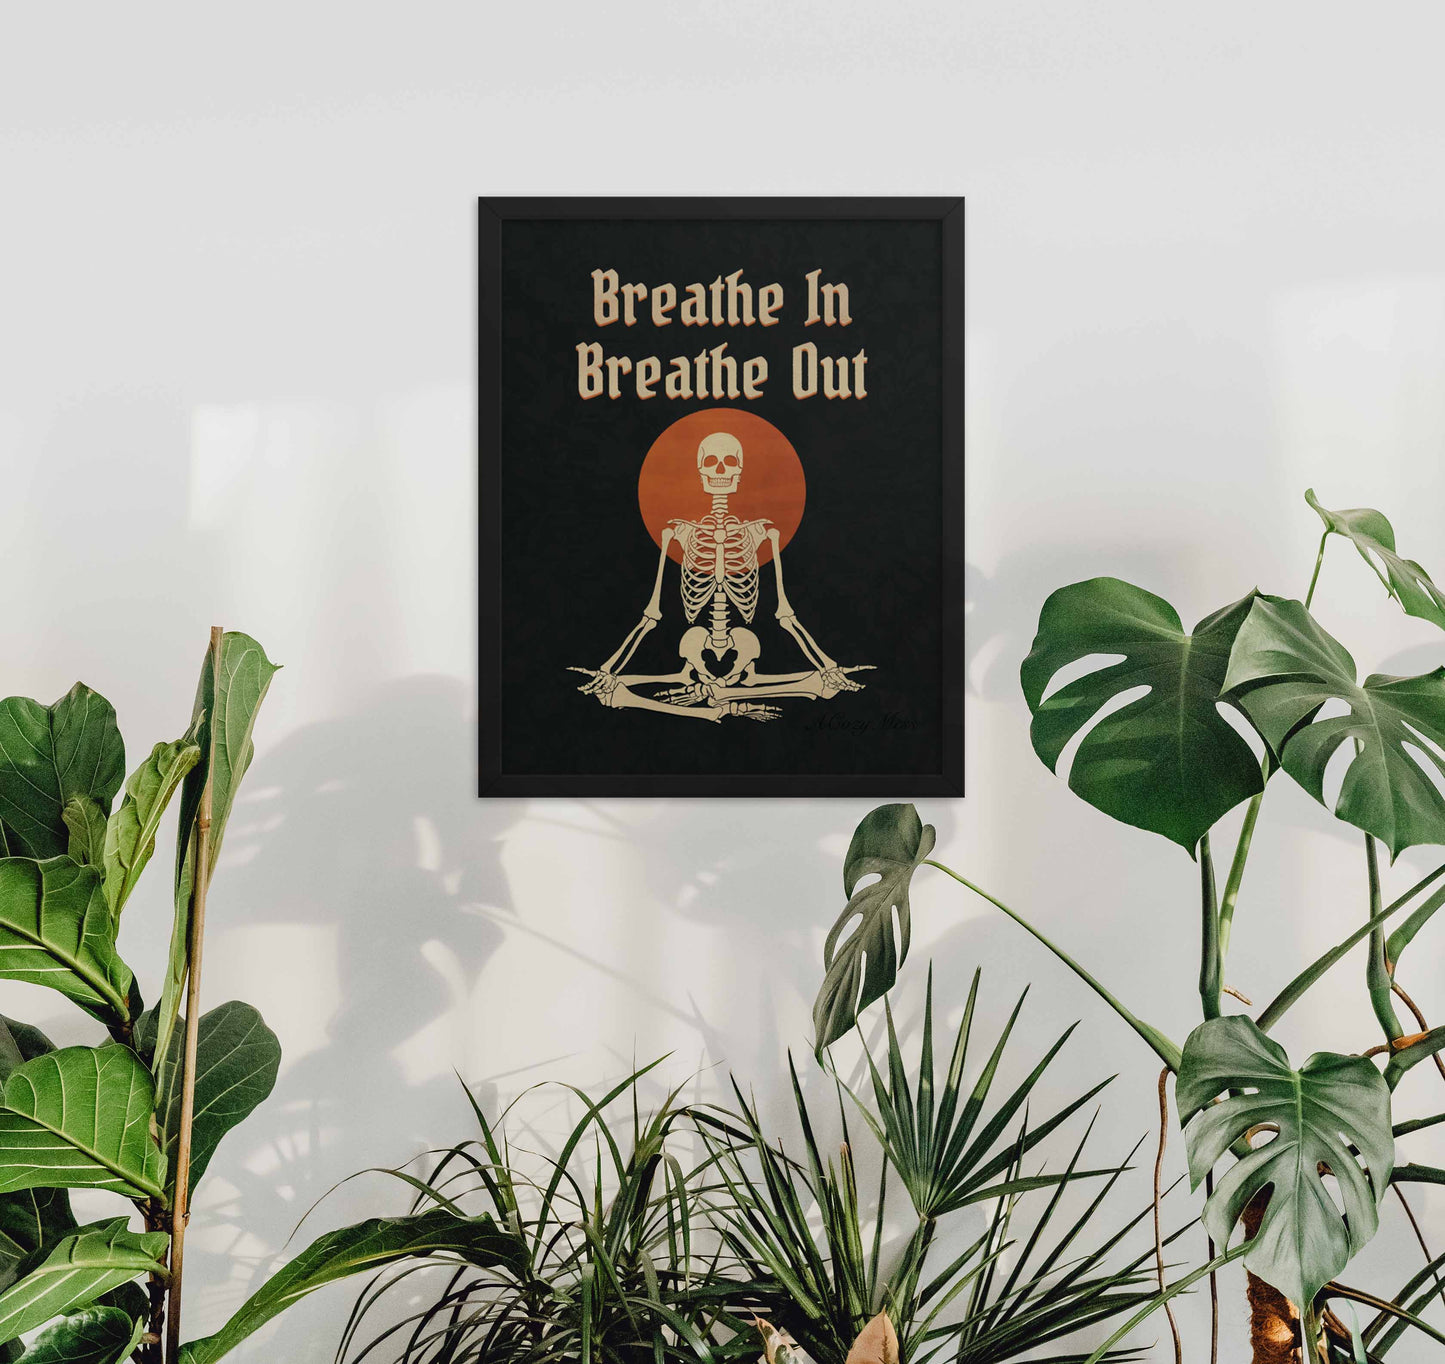 Black framed wall art of " Breathe in breathe Out" with an illustration of a meditating skeleton